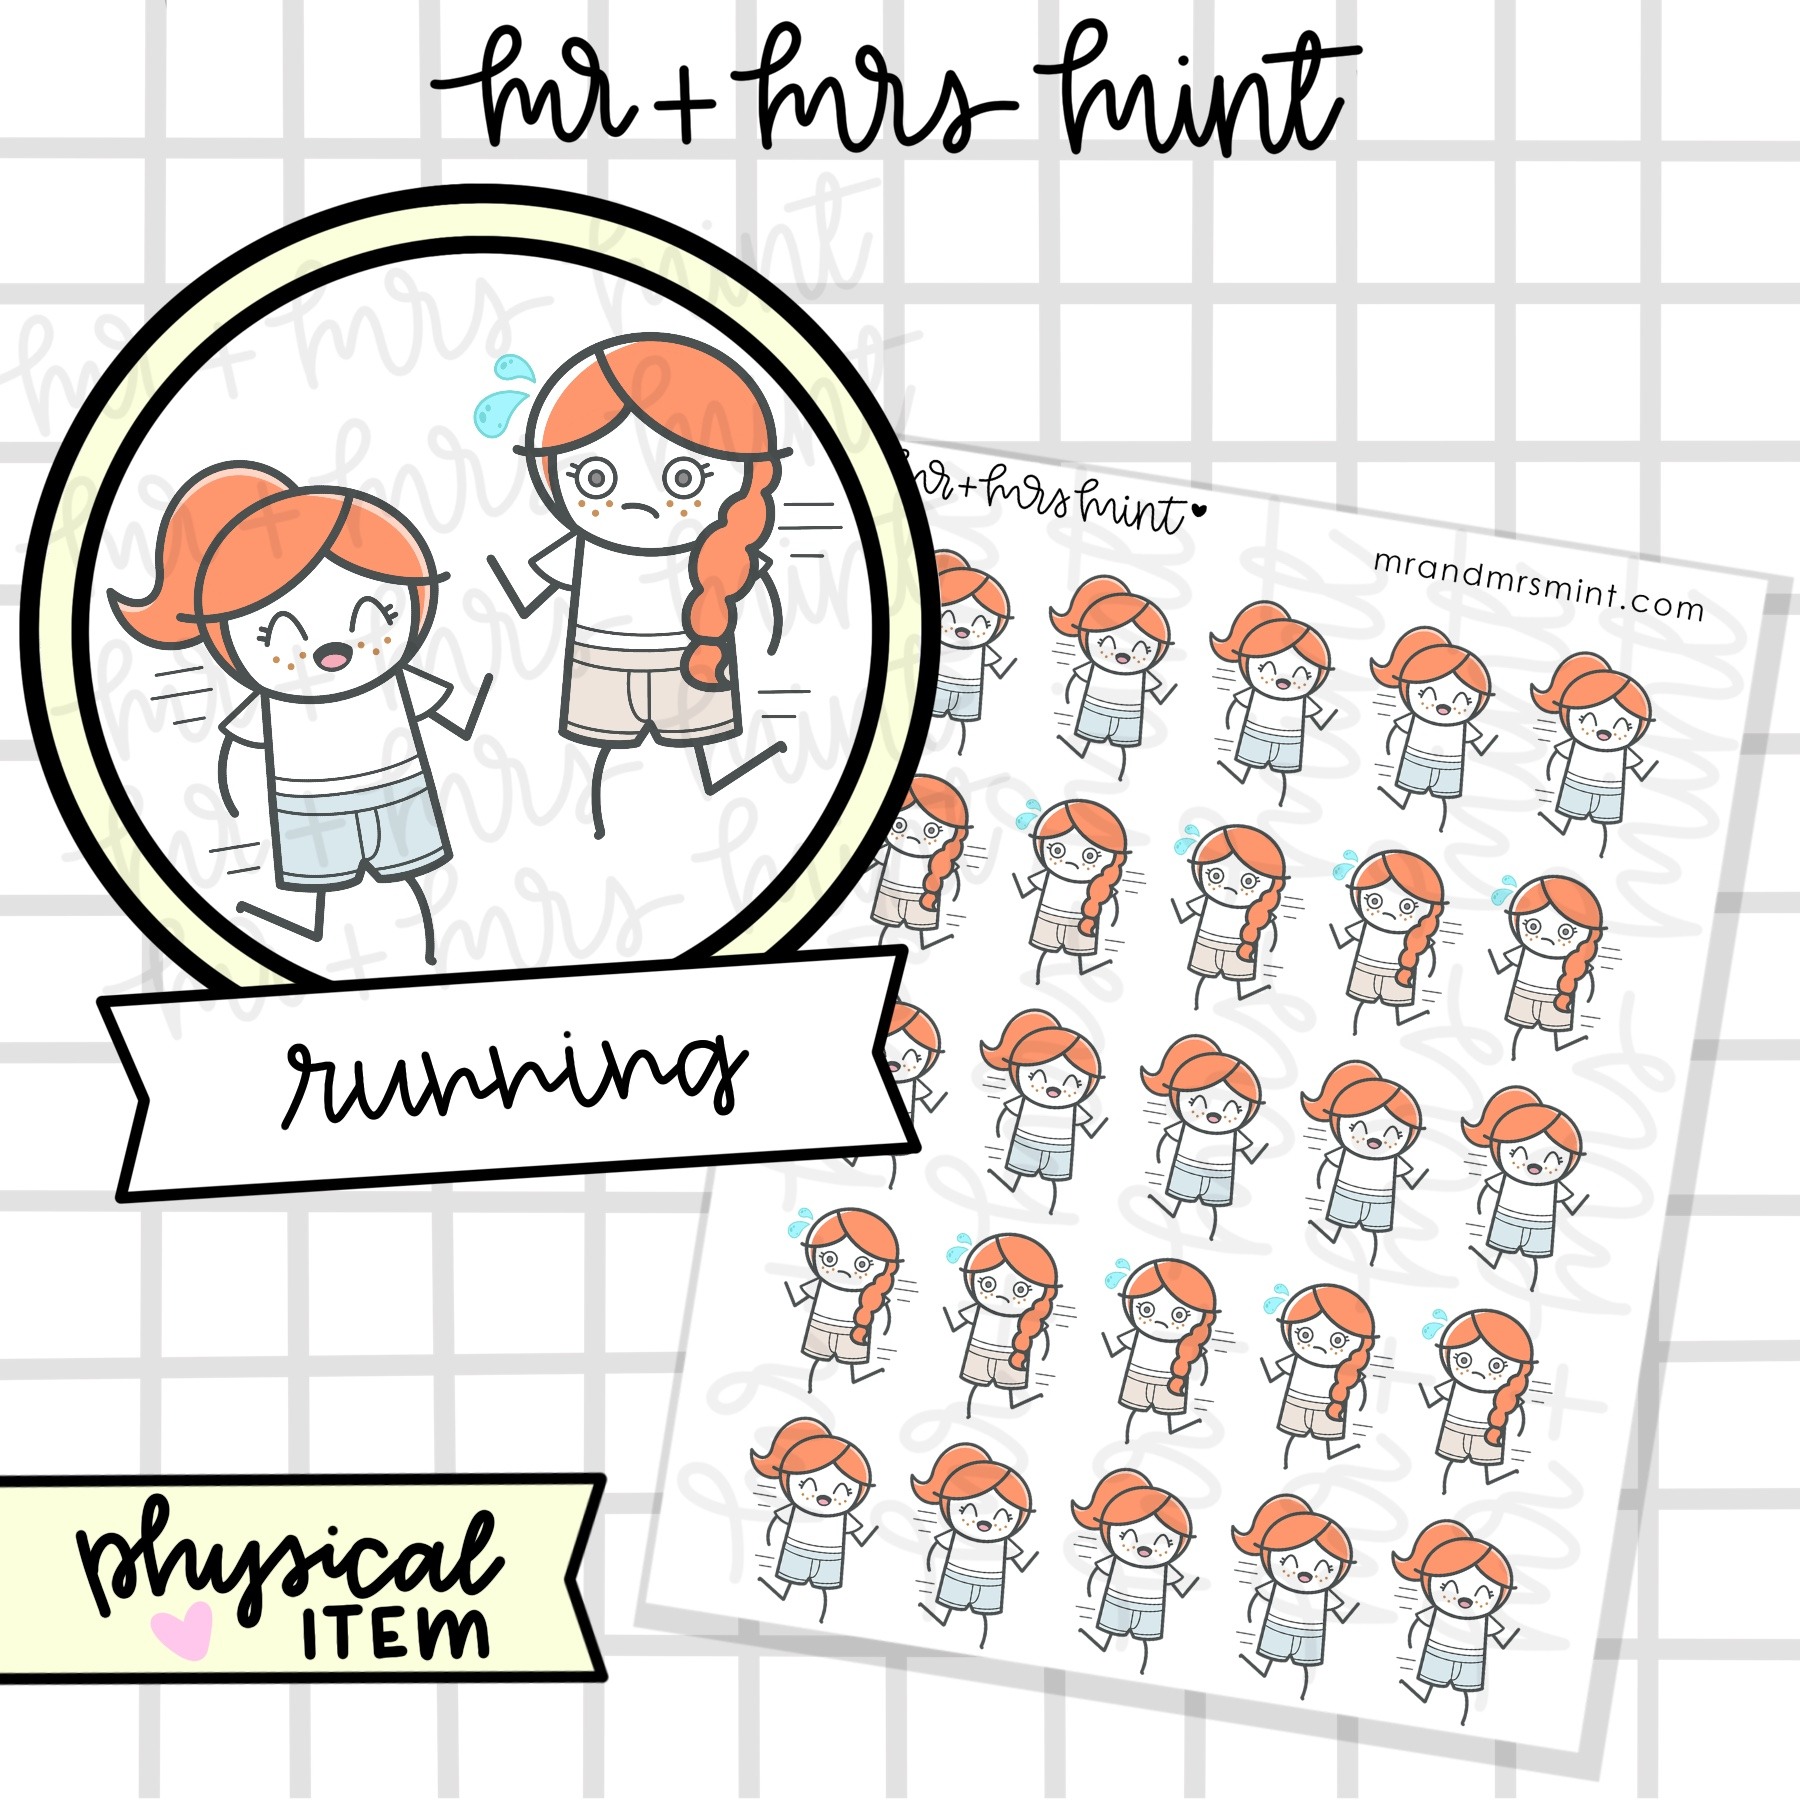 Period Tracking Planner Stickers / Appointments Reminder Stickers